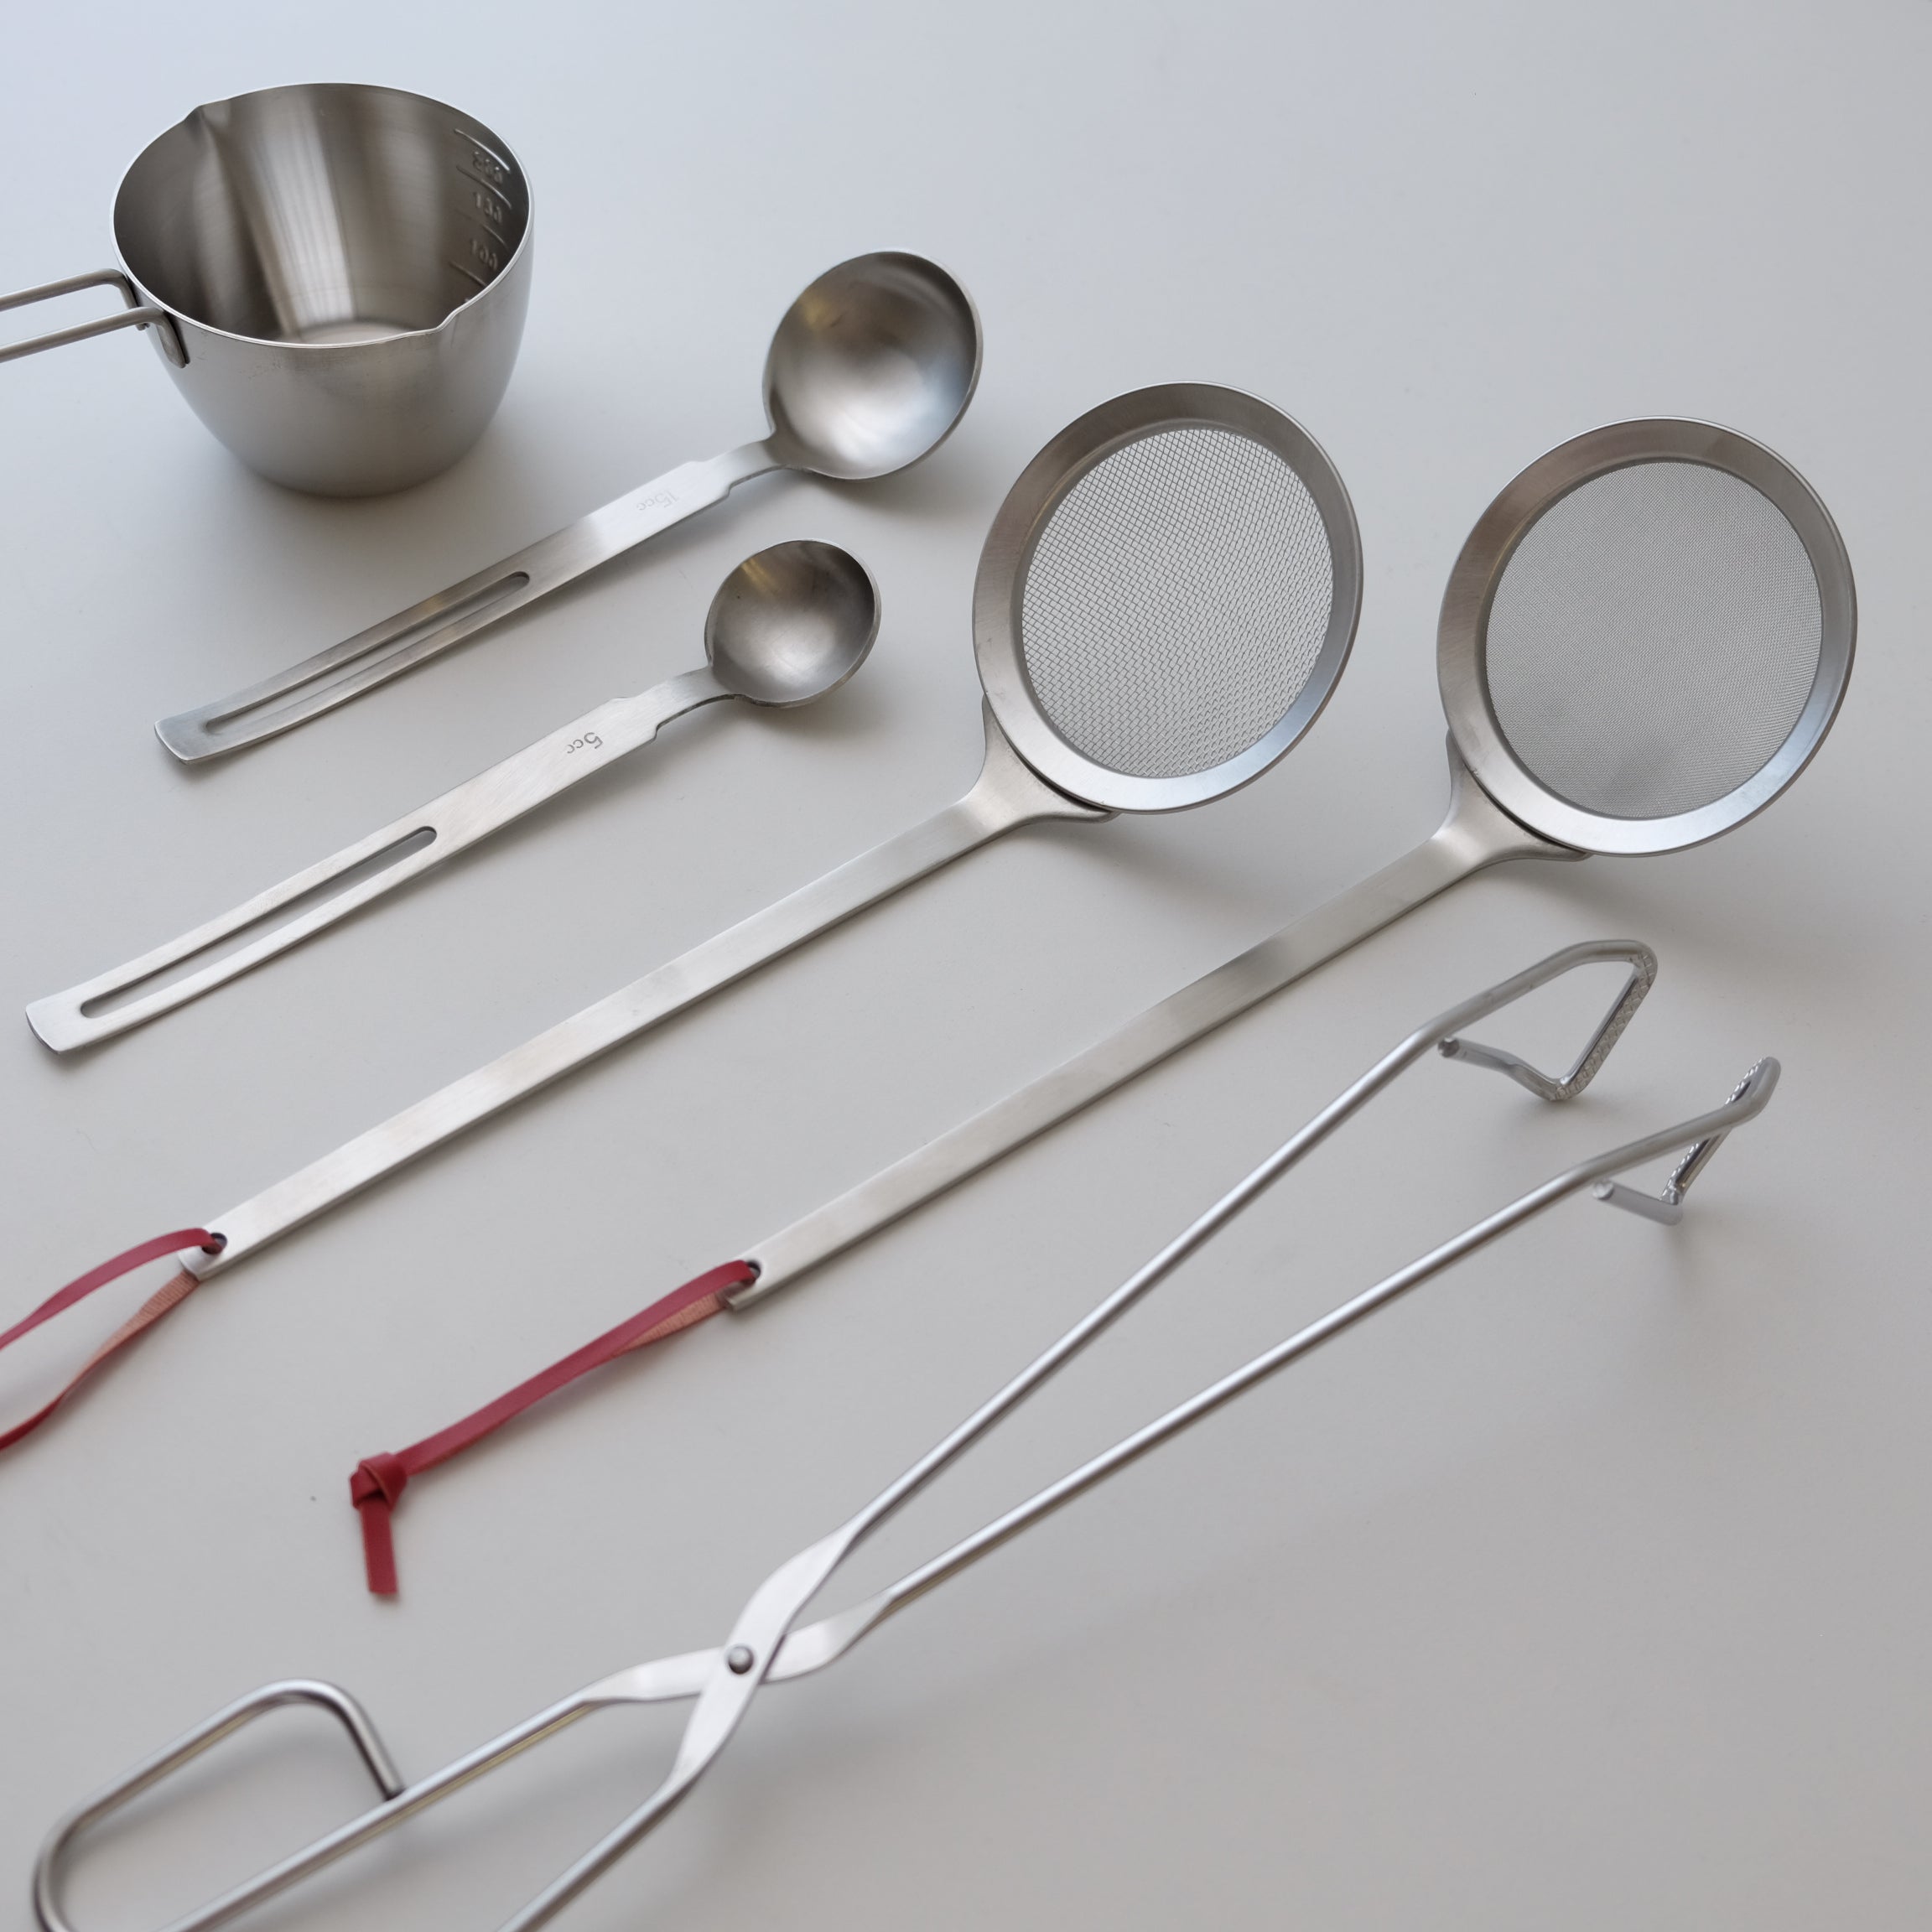 Ewigstern Stainless Steel Cooking Tools